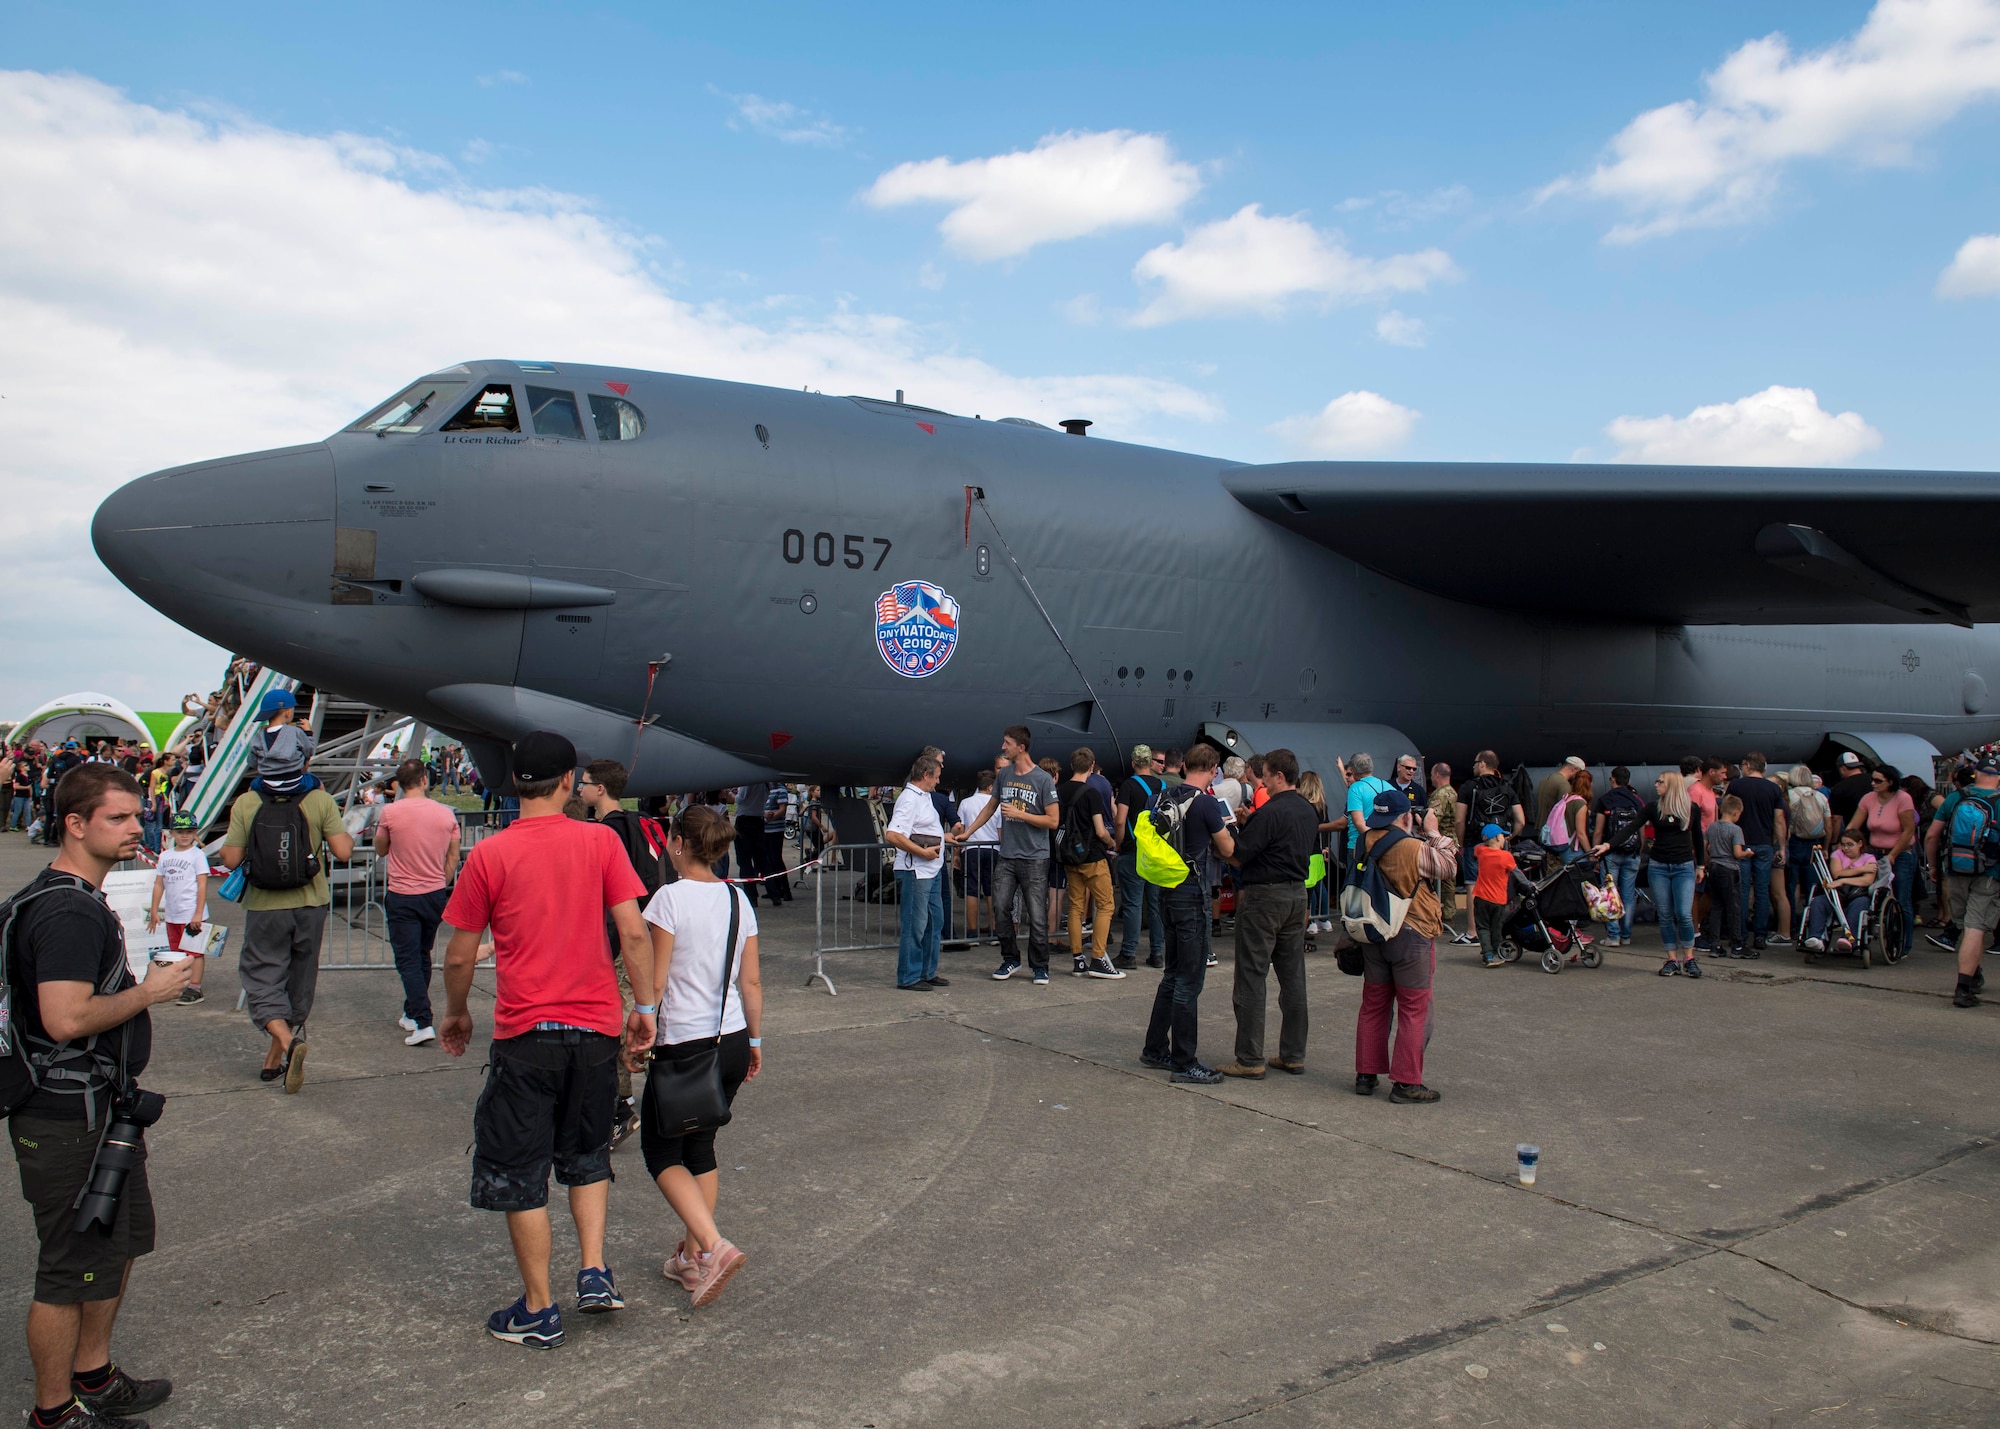 An Air Force Reserve Command B-52 Stratofortress, assigned to the 307th Bomb Wing, Barksdale Air Force Base, Louisiana, is on display at Ostrava Air Base, Czech Republic, during NATO Days. NATO Days is a Czech Republic-led air show and exhibition that showcases military ground and aviation capabilities from 19 nations. Participation in NATO Days increases our understanding of European ally and partner capabilities, greatly enhancing our ability to operate together as a team. (U.S. Navy photo by Mass Communication Specialist 2nd Class Robert J. Baldock)